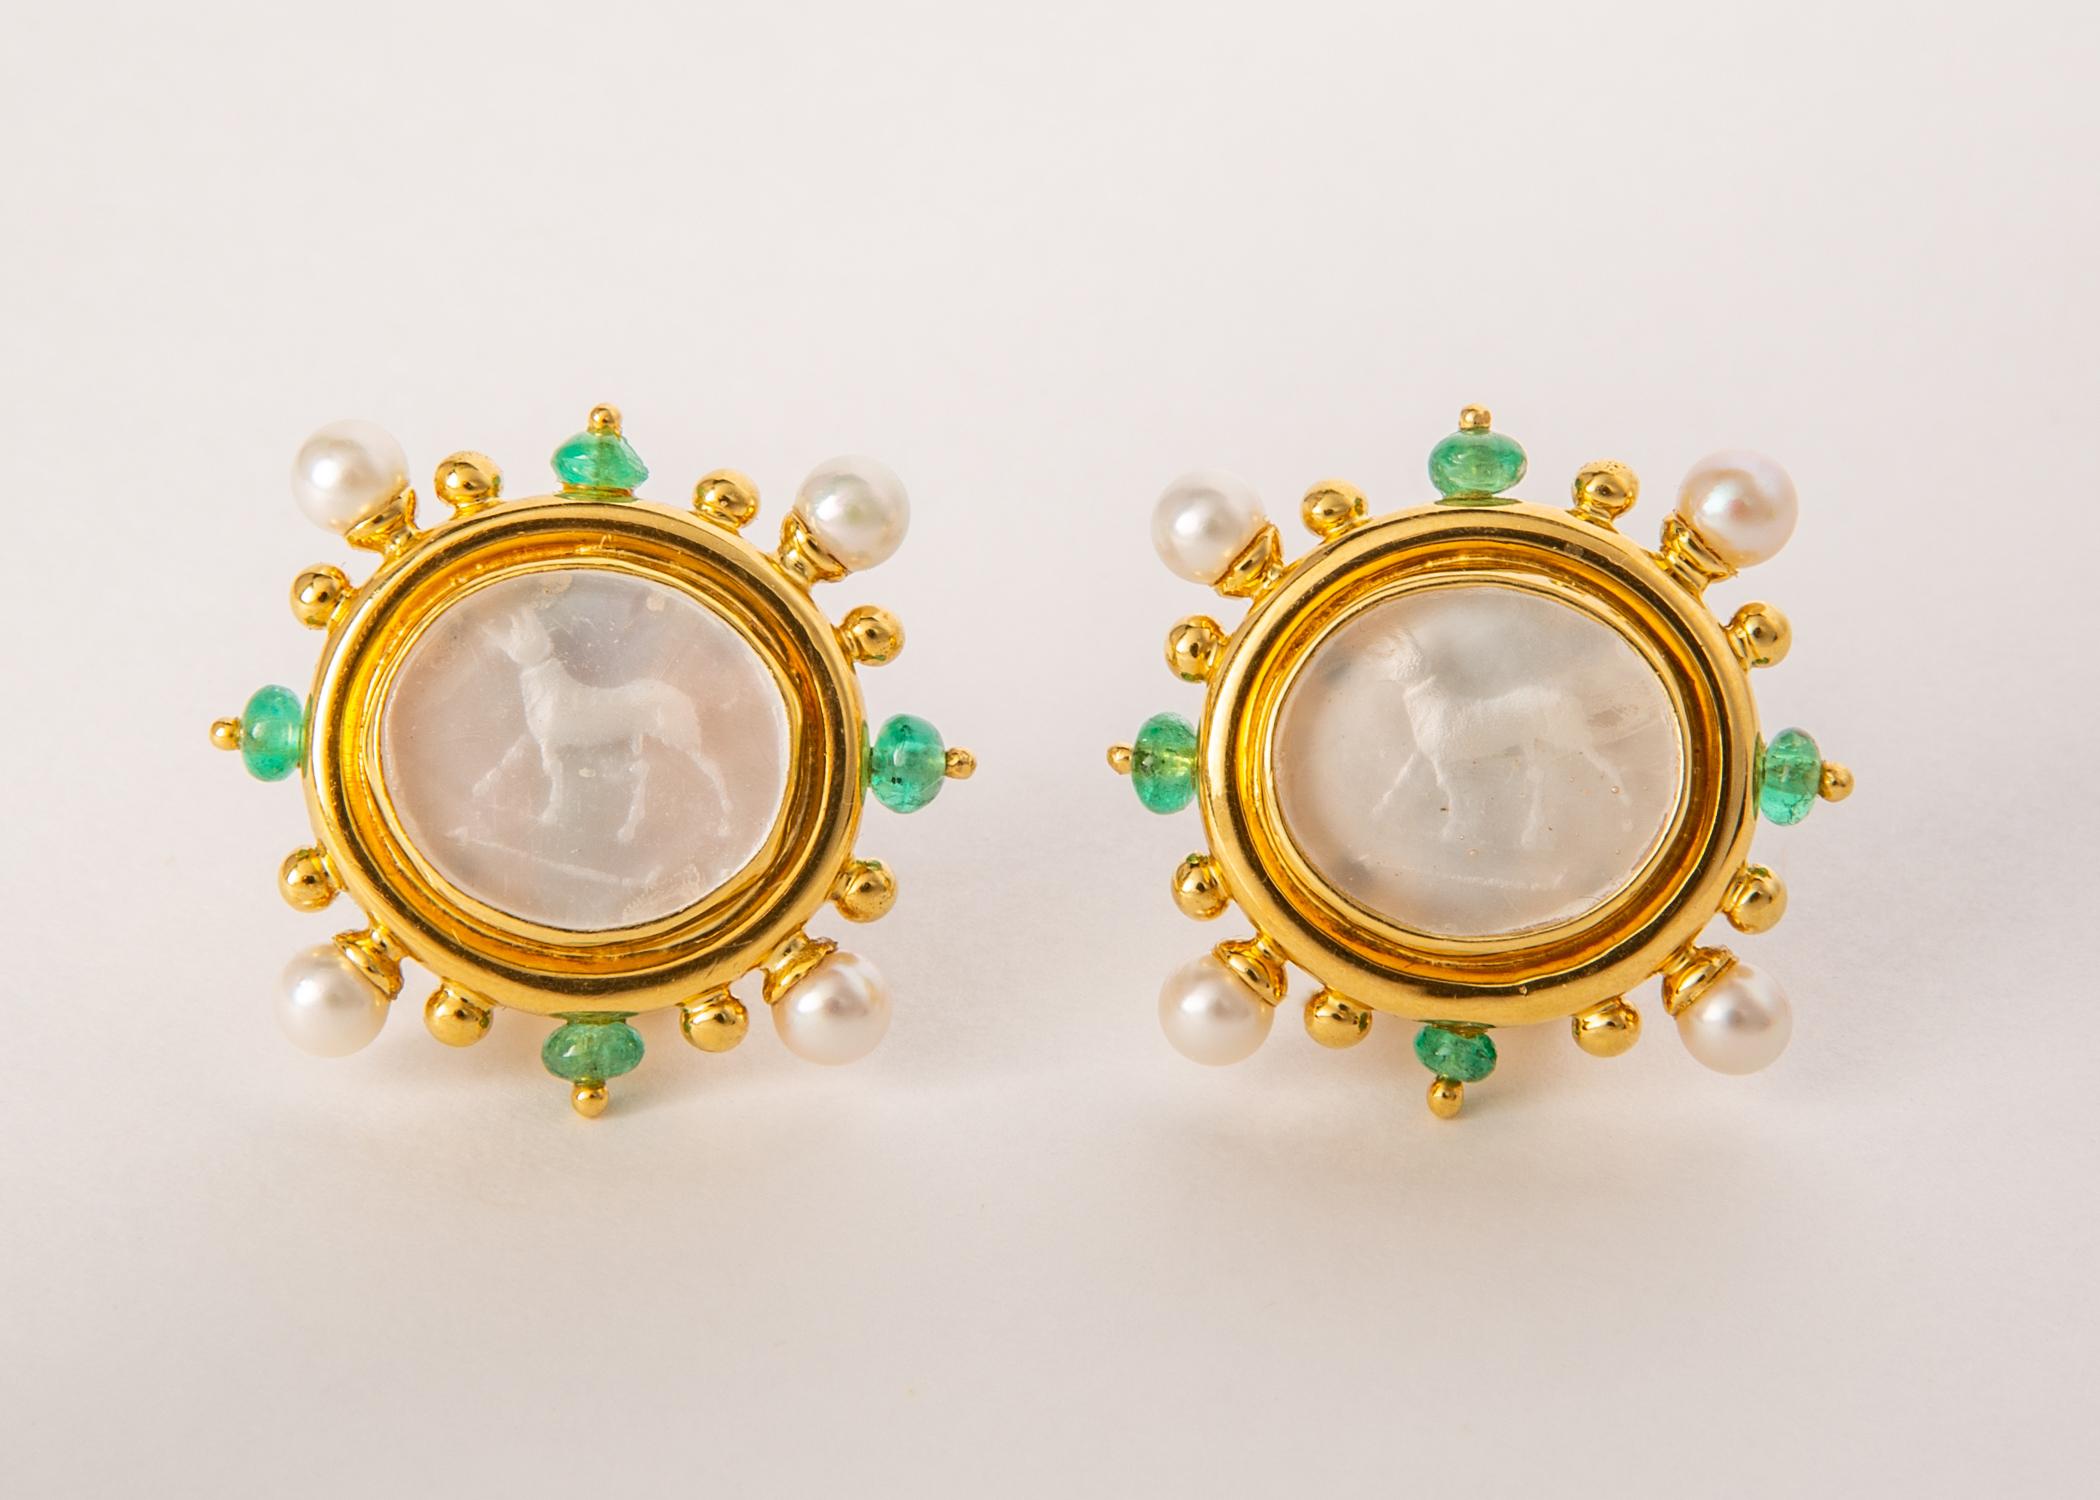 Contemporary Elizabeth Locke Standing Dog Intaglio Earrings Framed with Pearls and Emeralds